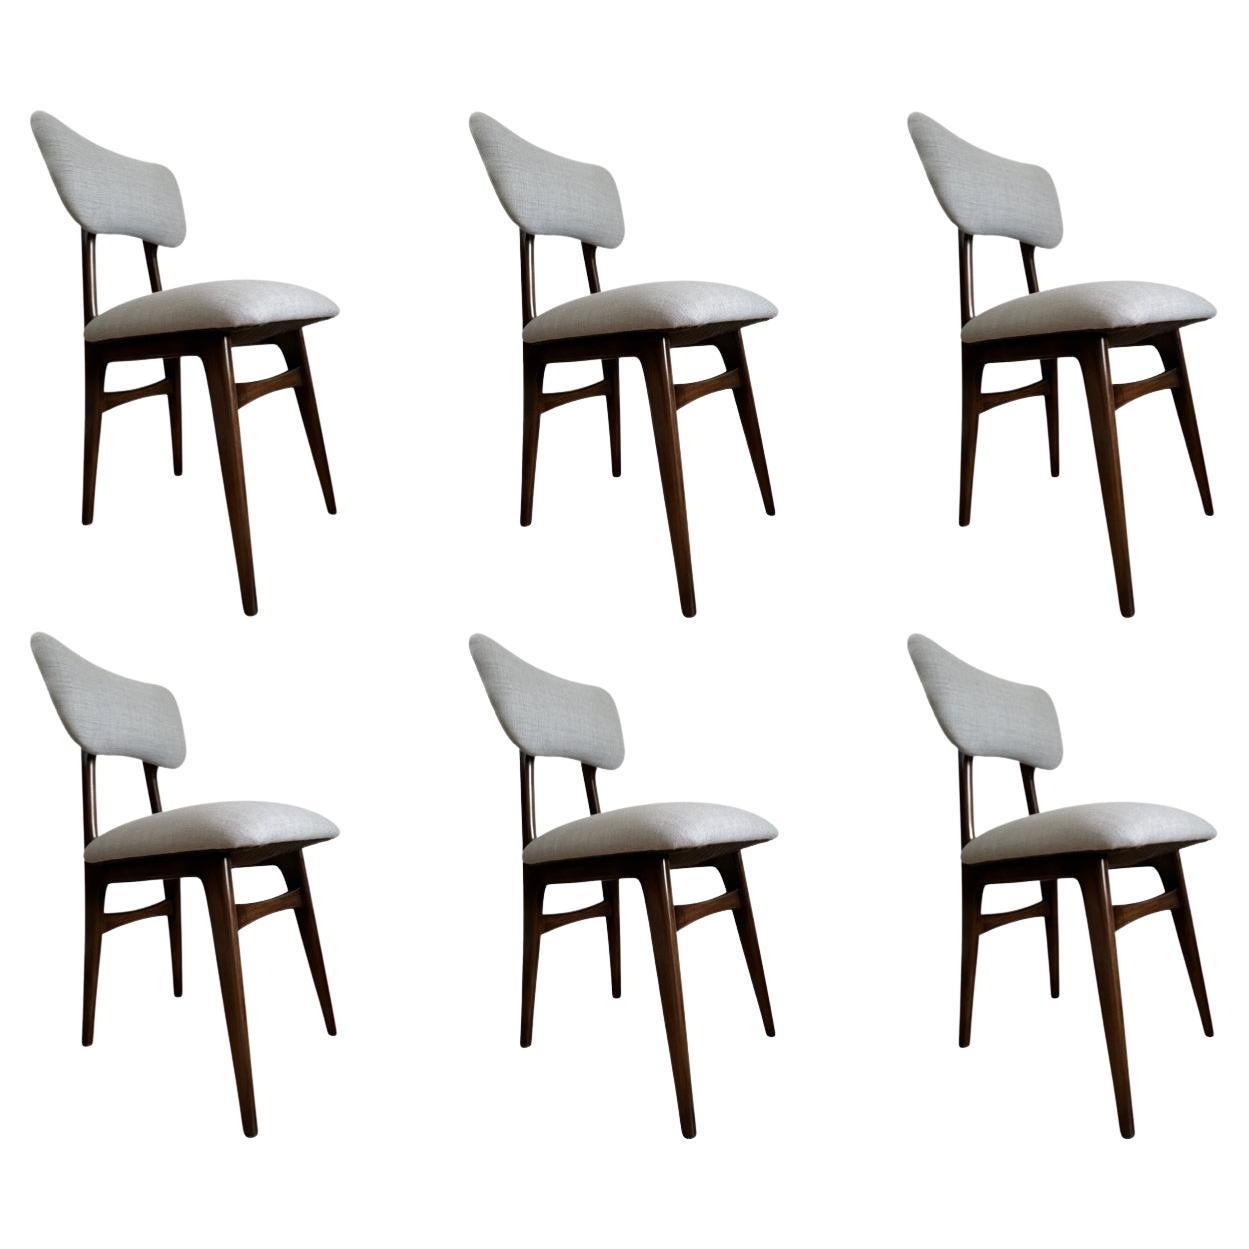 Set of 6 Midcentury Grey Dining Chairs, Europe, 1960s For Sale